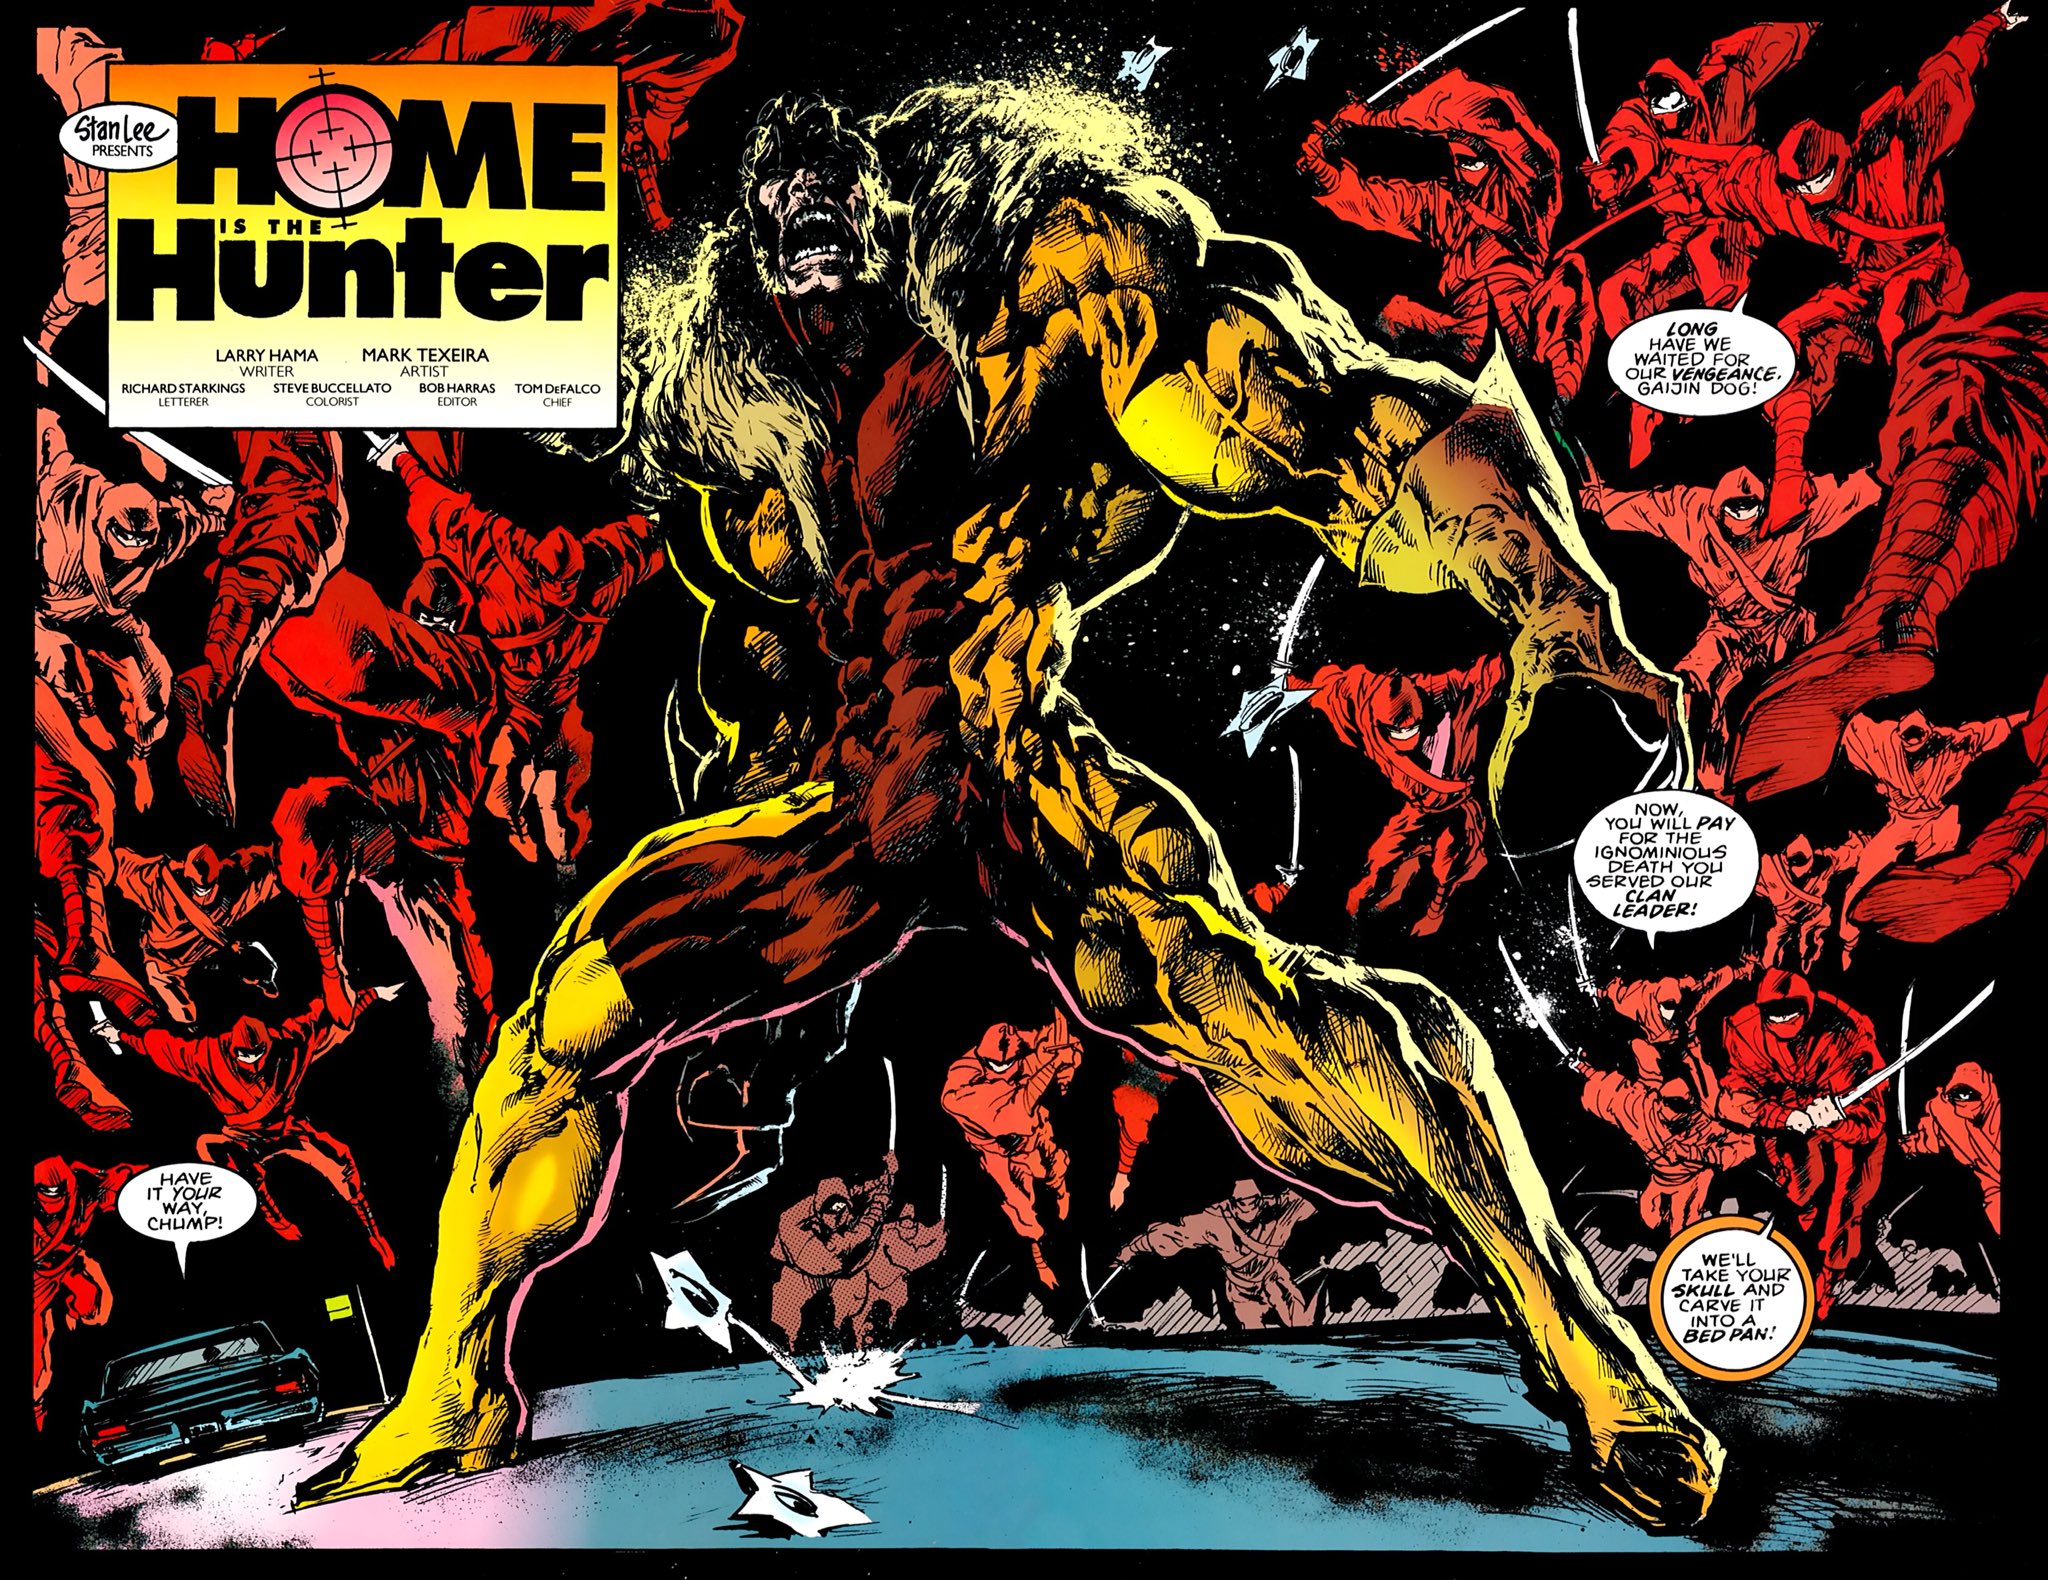 Cool Comic Art on X: Sabretooth (1993) art by Mark Texeira https